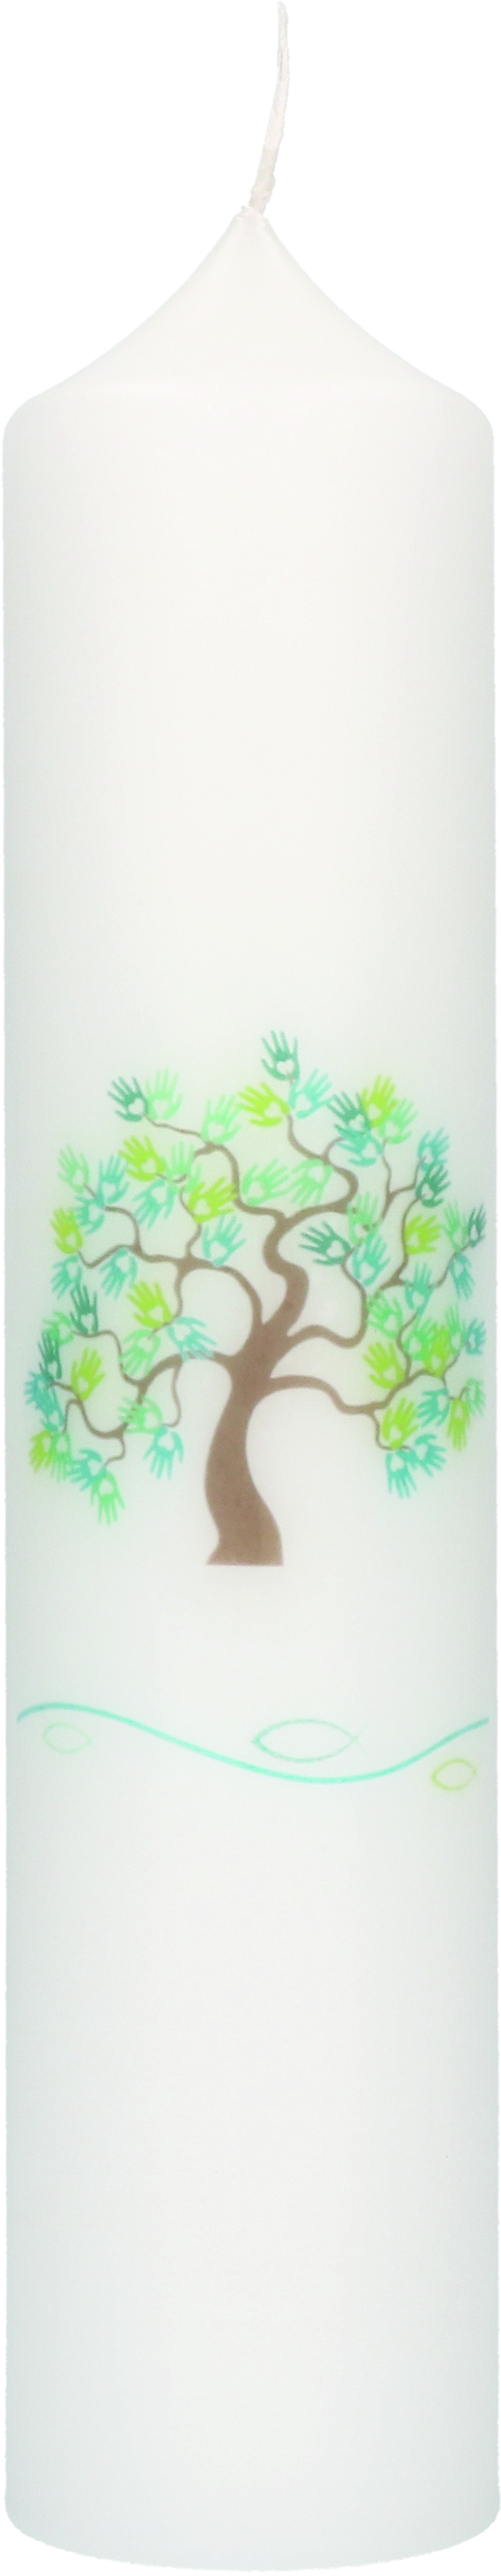 Baptism Candle with Print Motif “Tree of Life, Fish and Wave